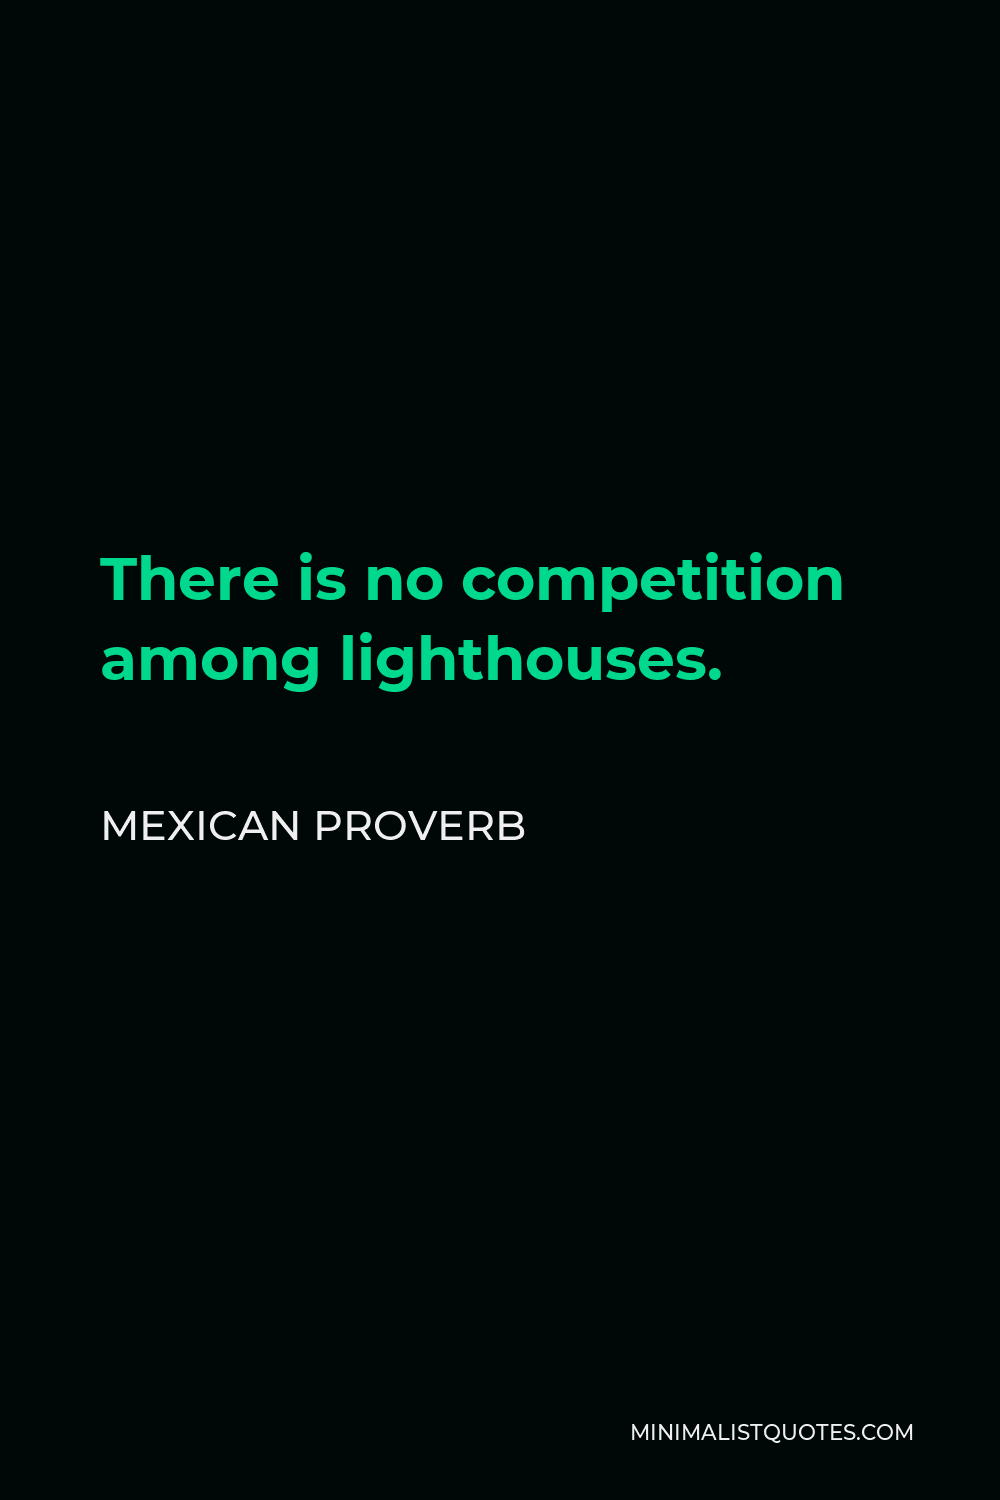 Mexican Proverb Quote - There is no competition among lighthouses.